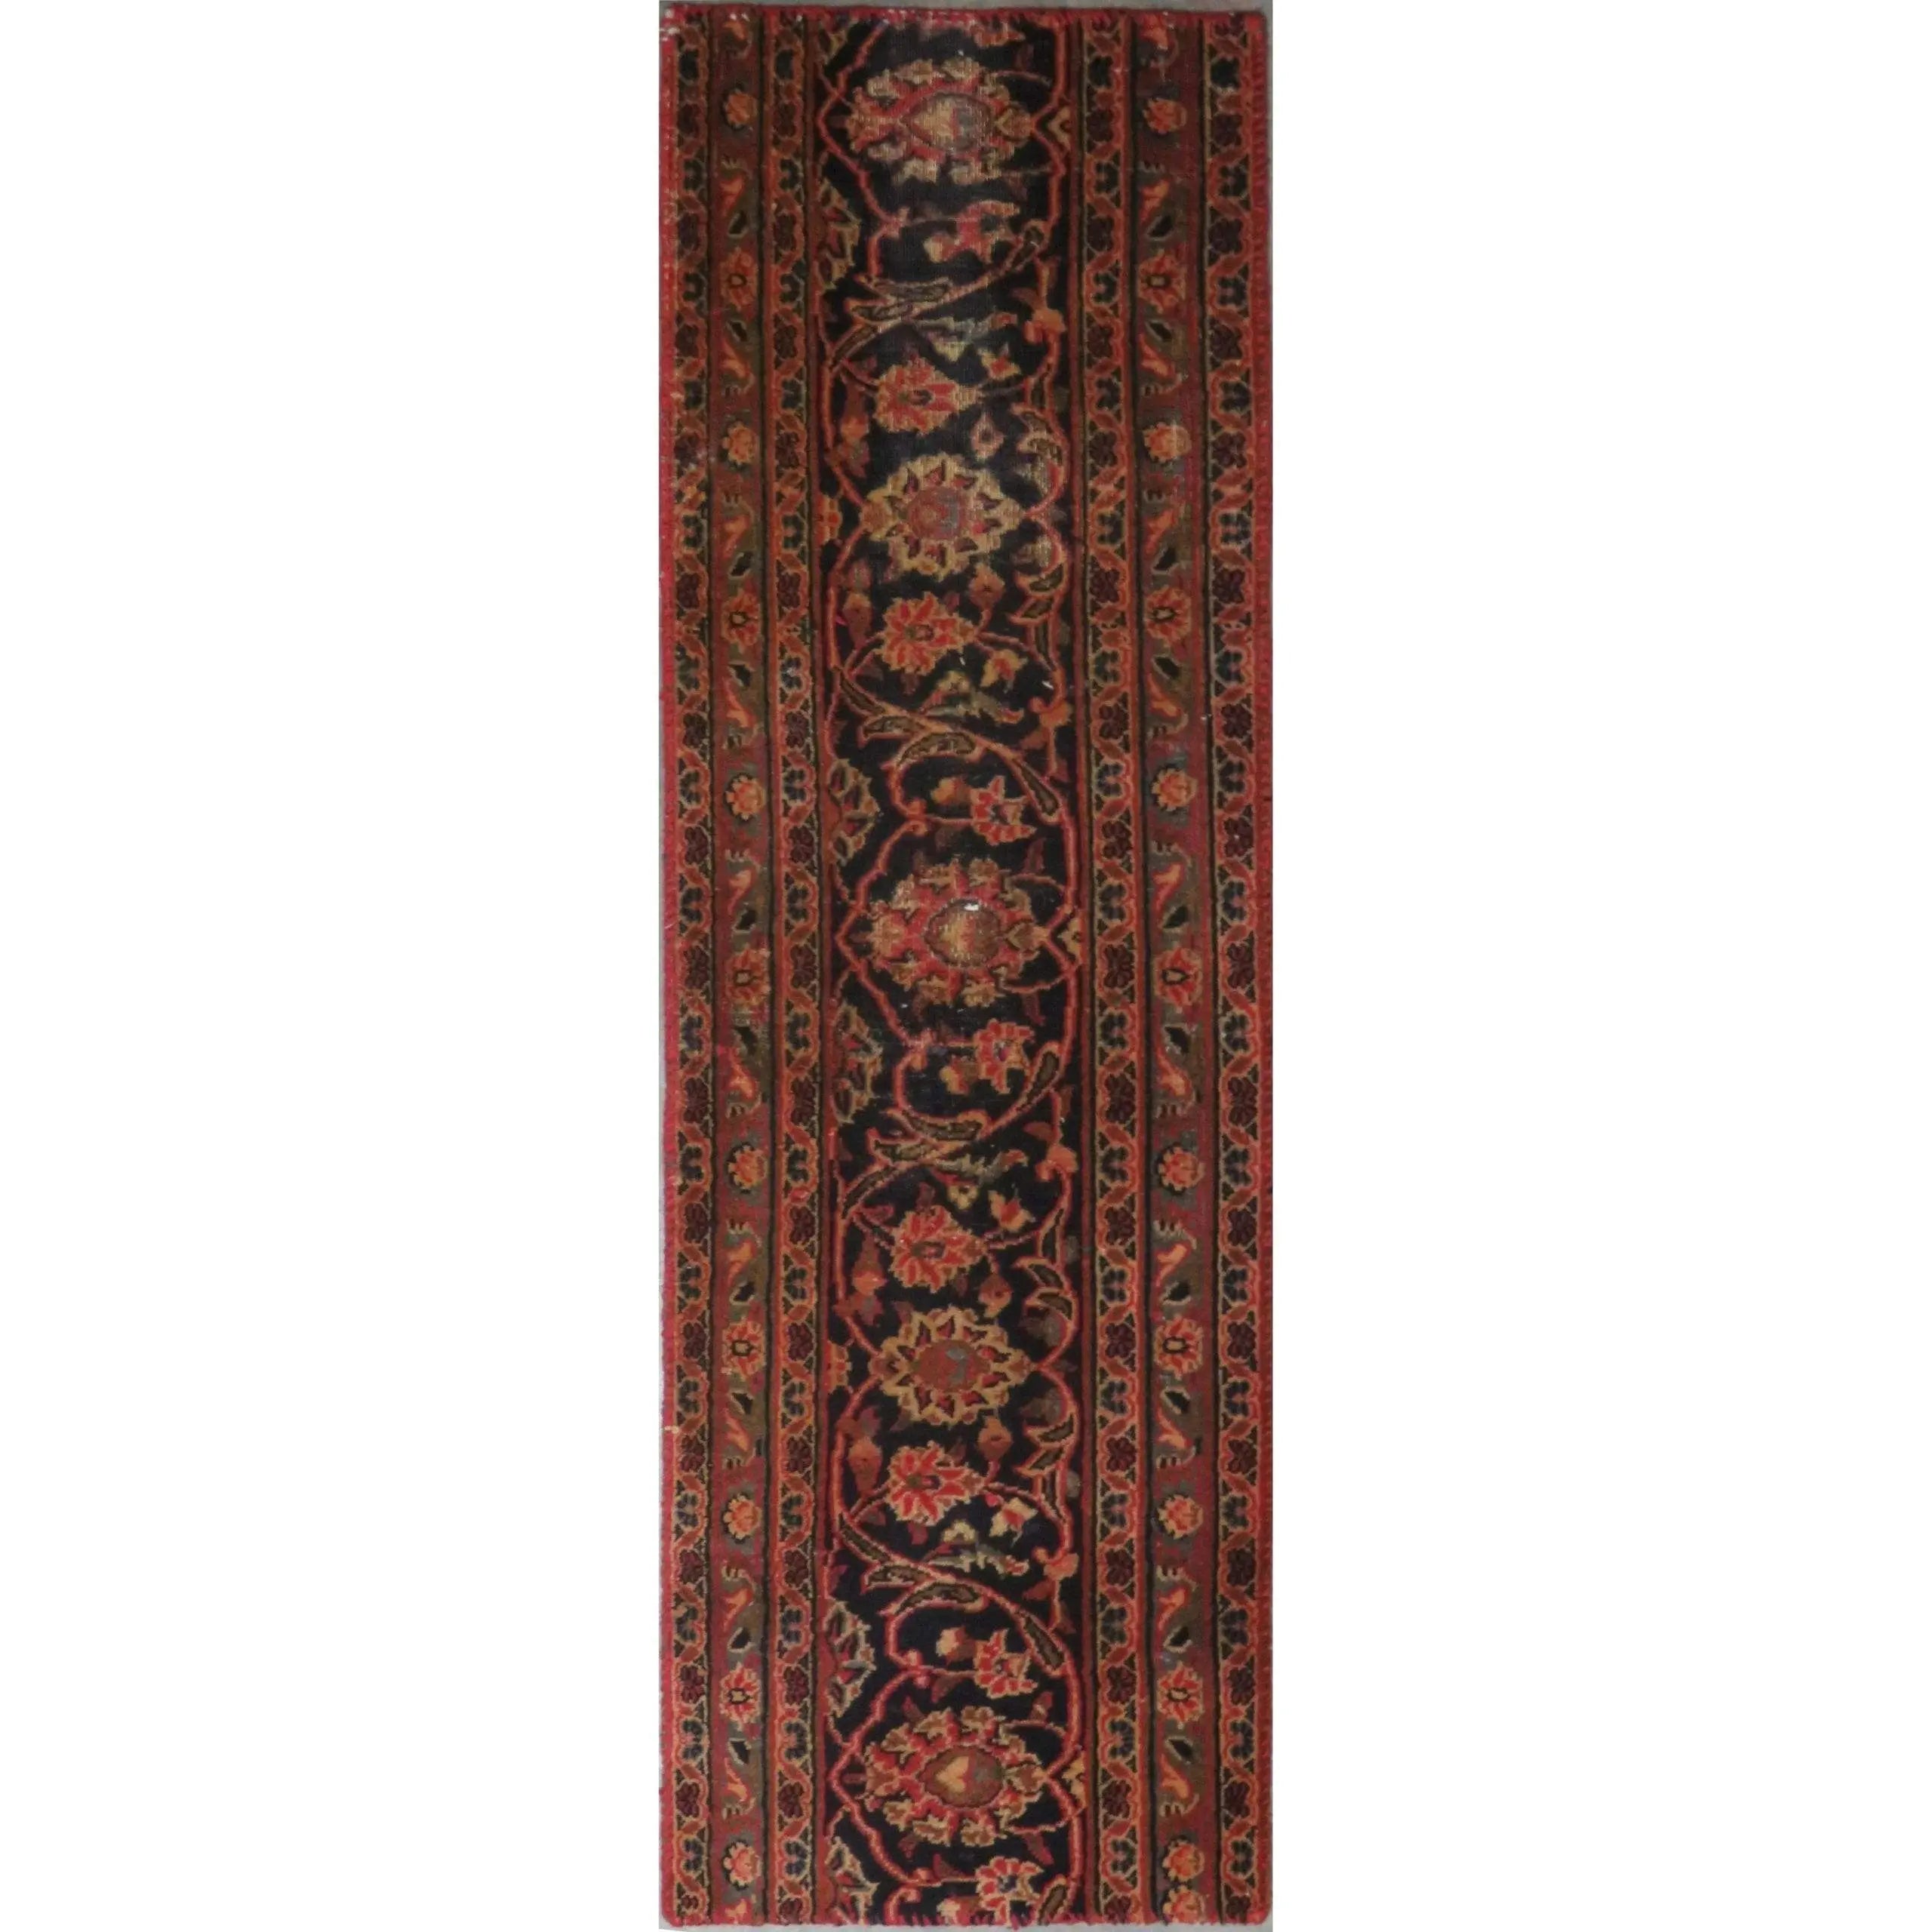 Hand-Knotted Persian Wool Rug _ Luxurious Vintage Design, 5'0" x 1'0", Artisan Crafted